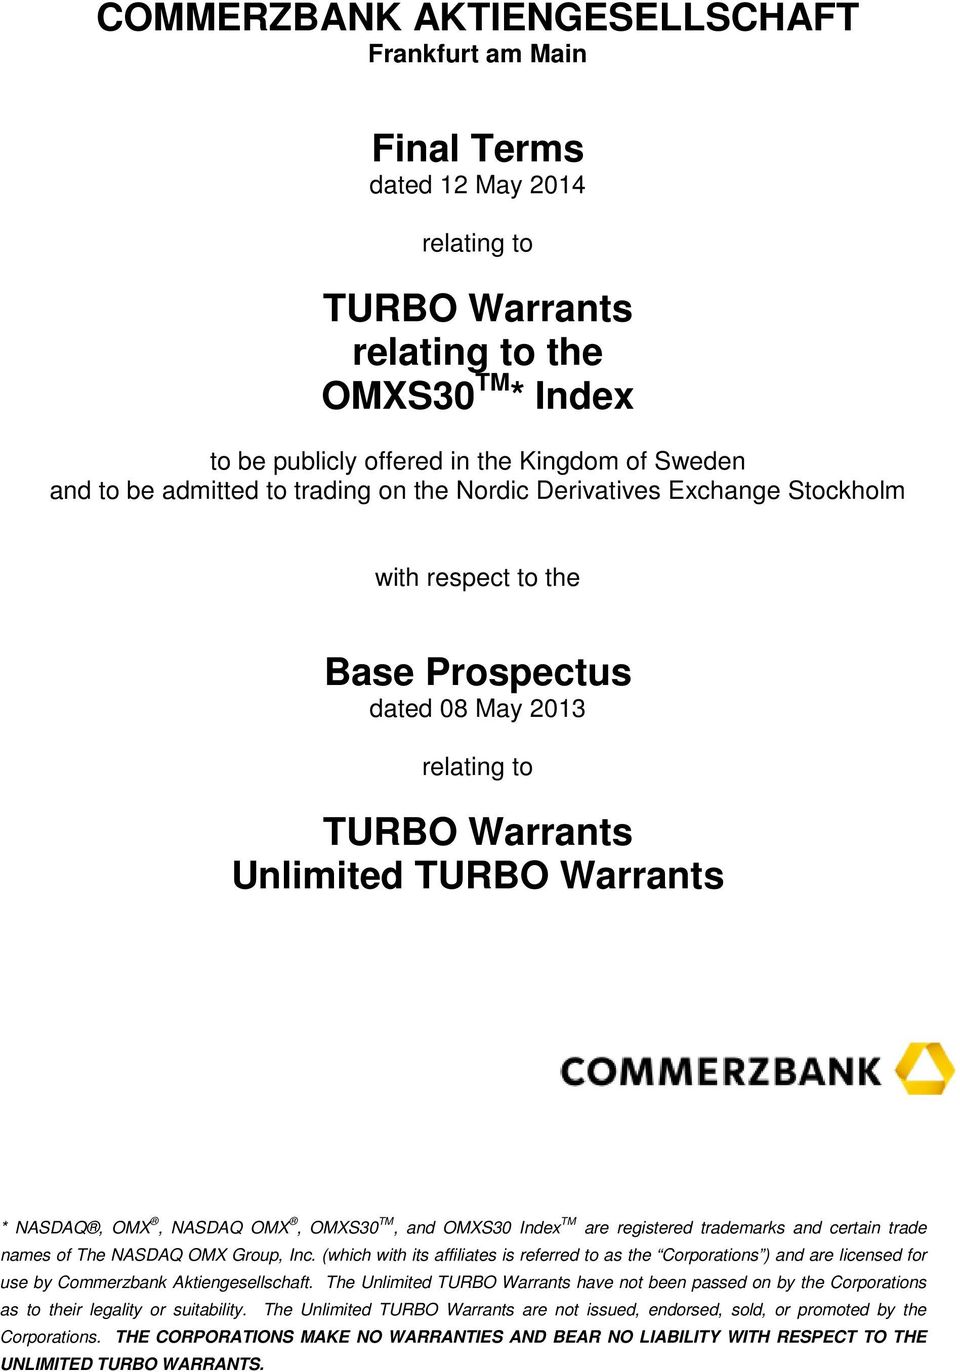 OMXS30 TM, and OMXS30 Index TM are registered trademarks and certain trade names of The NASDAQ OMX Group, Inc.